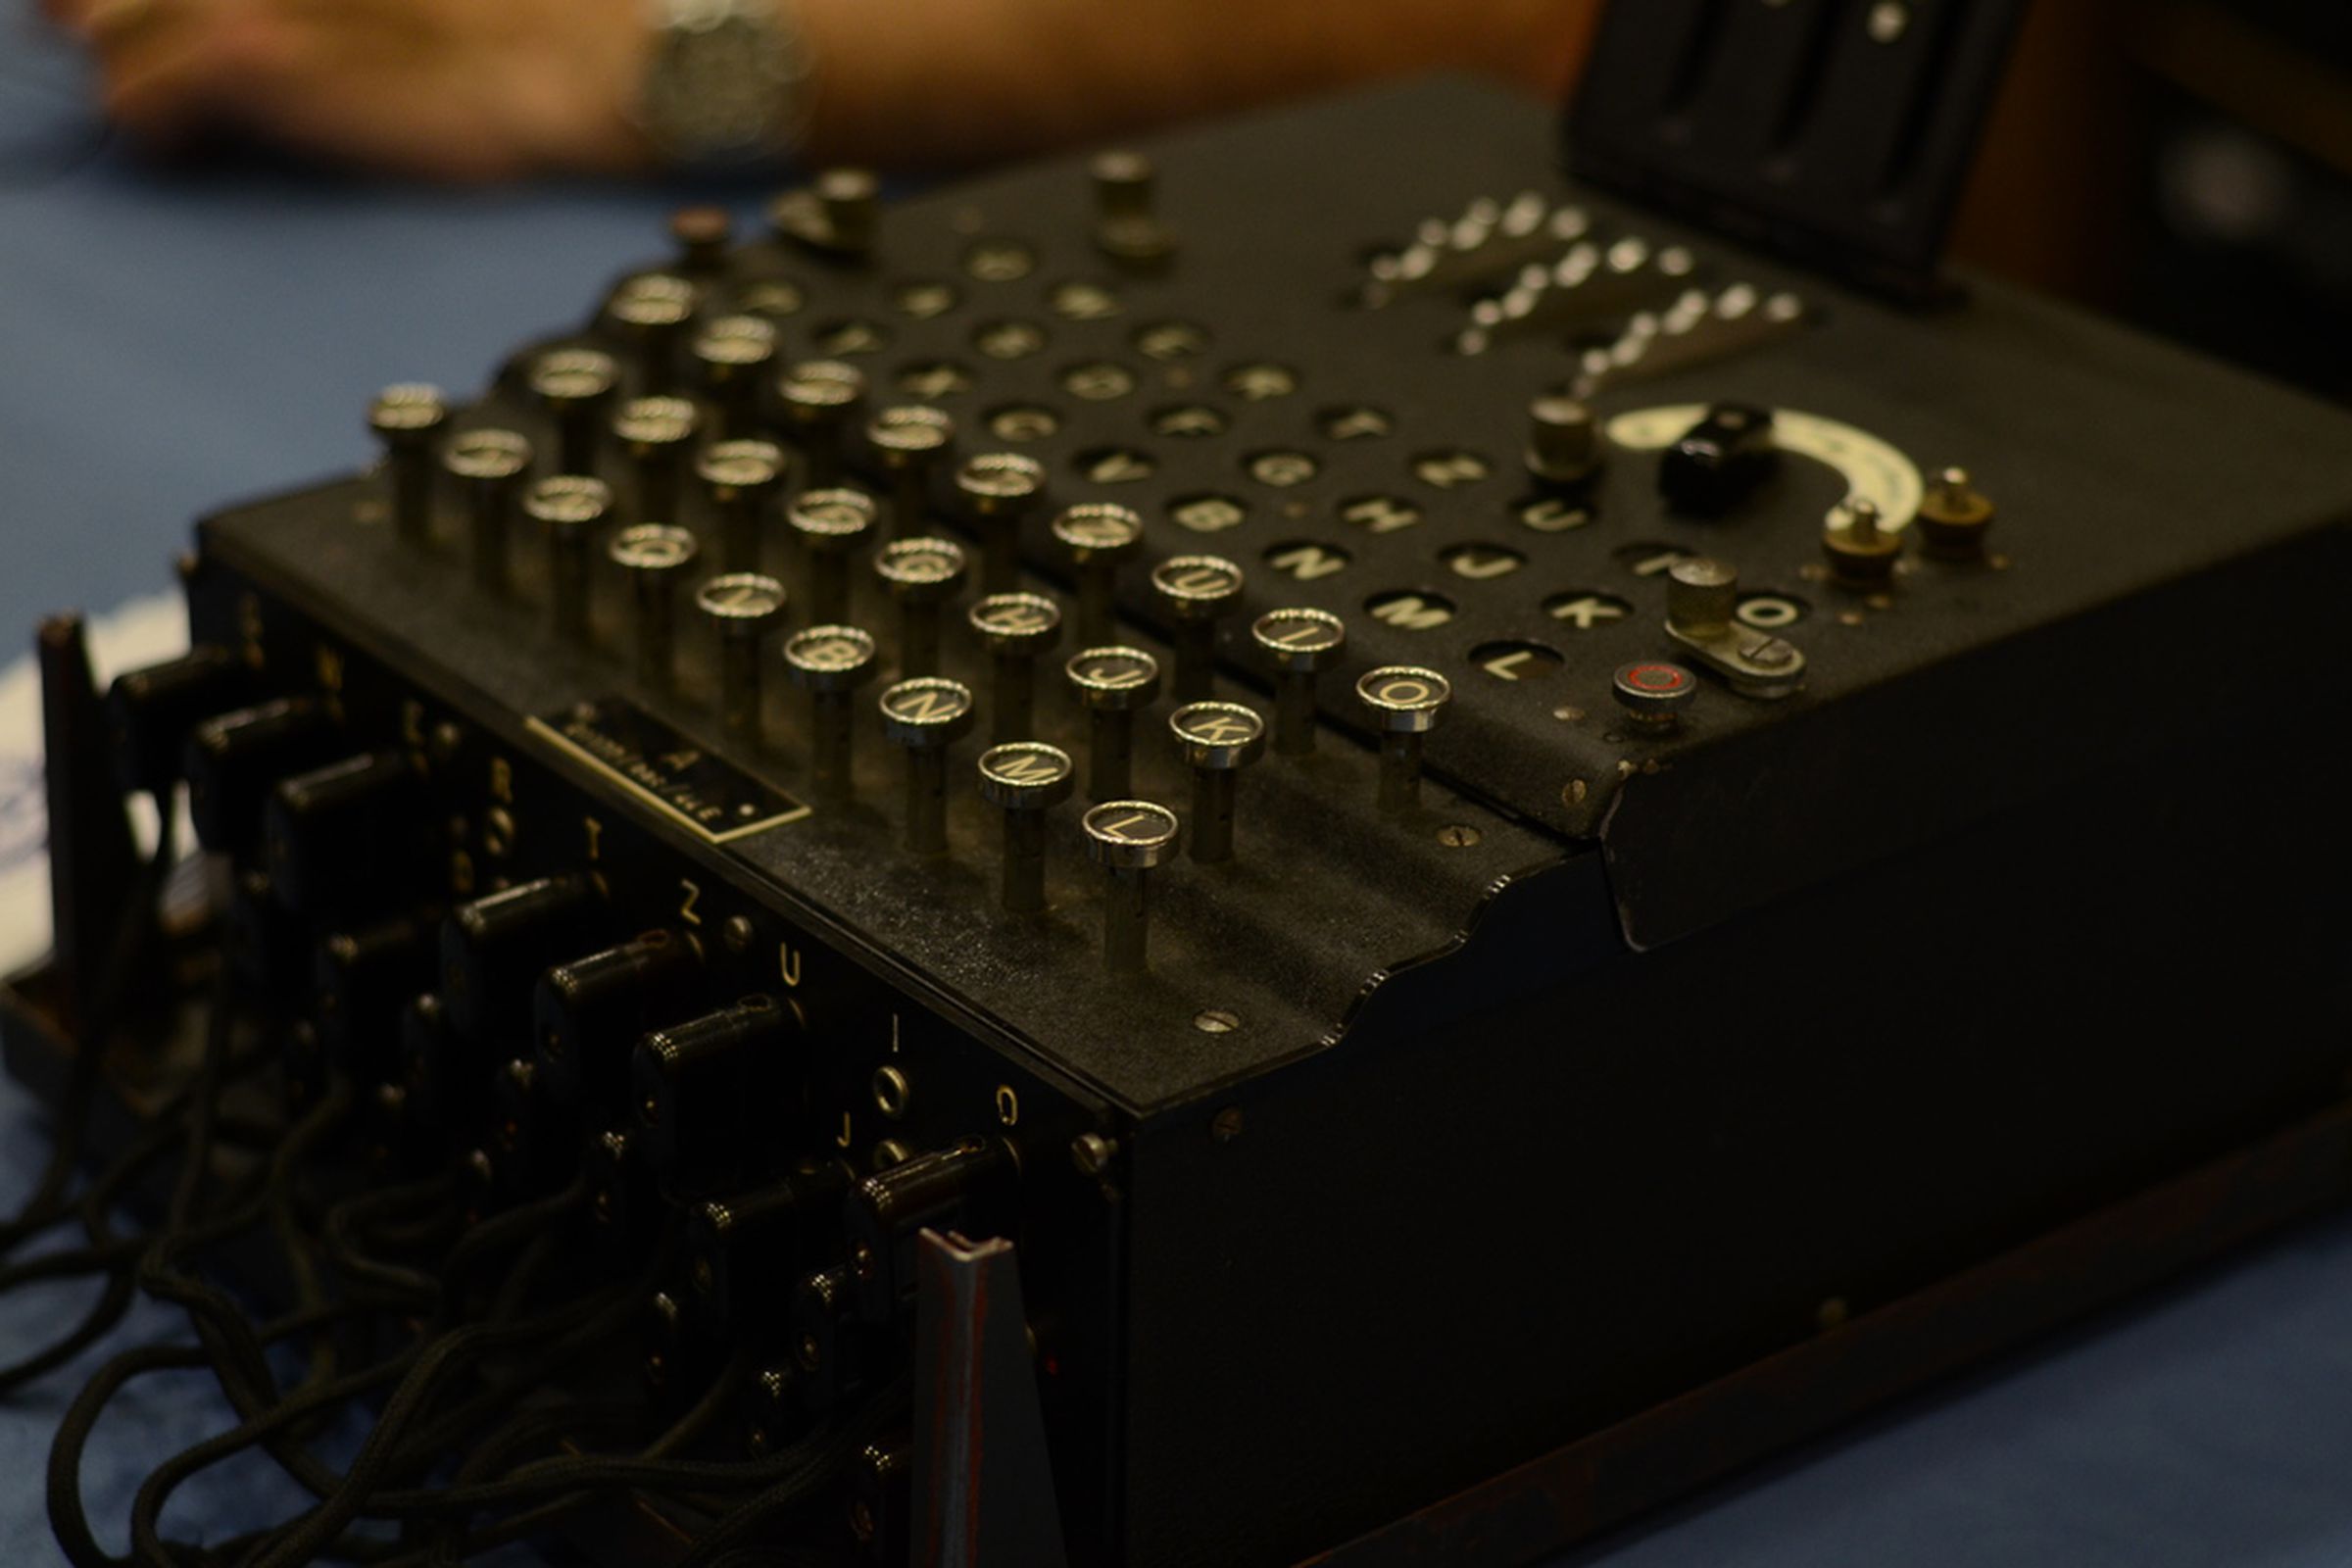 The Enigma machine makes an appearance to help the NSA's recruitment efforts at Def Con